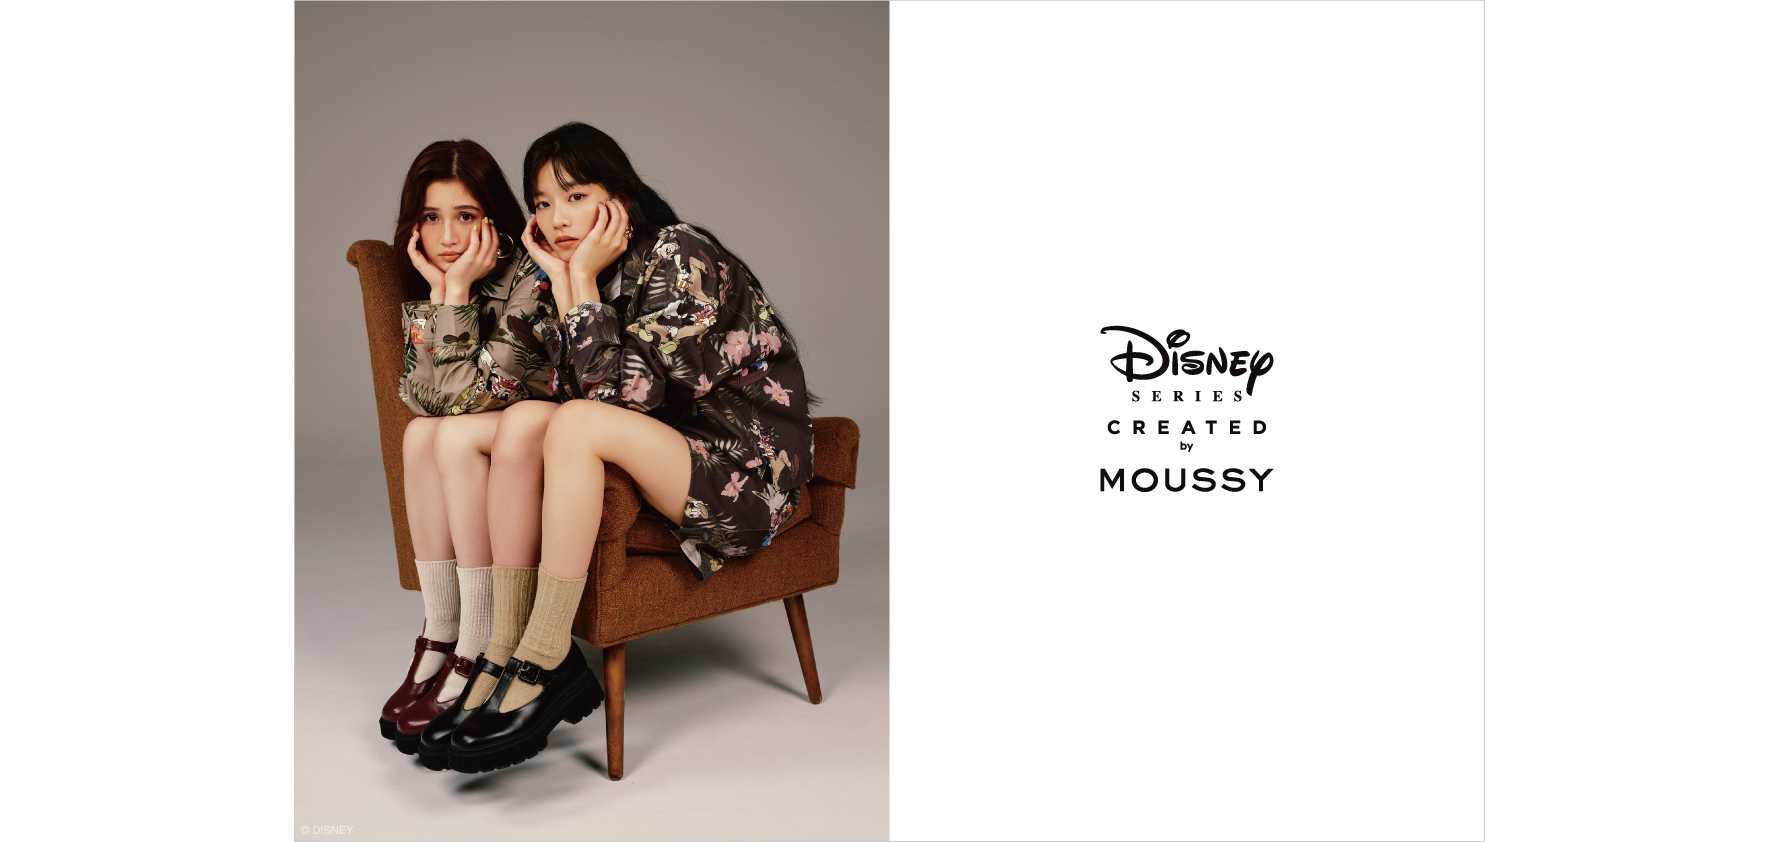 disney-series-created-by-moussy1